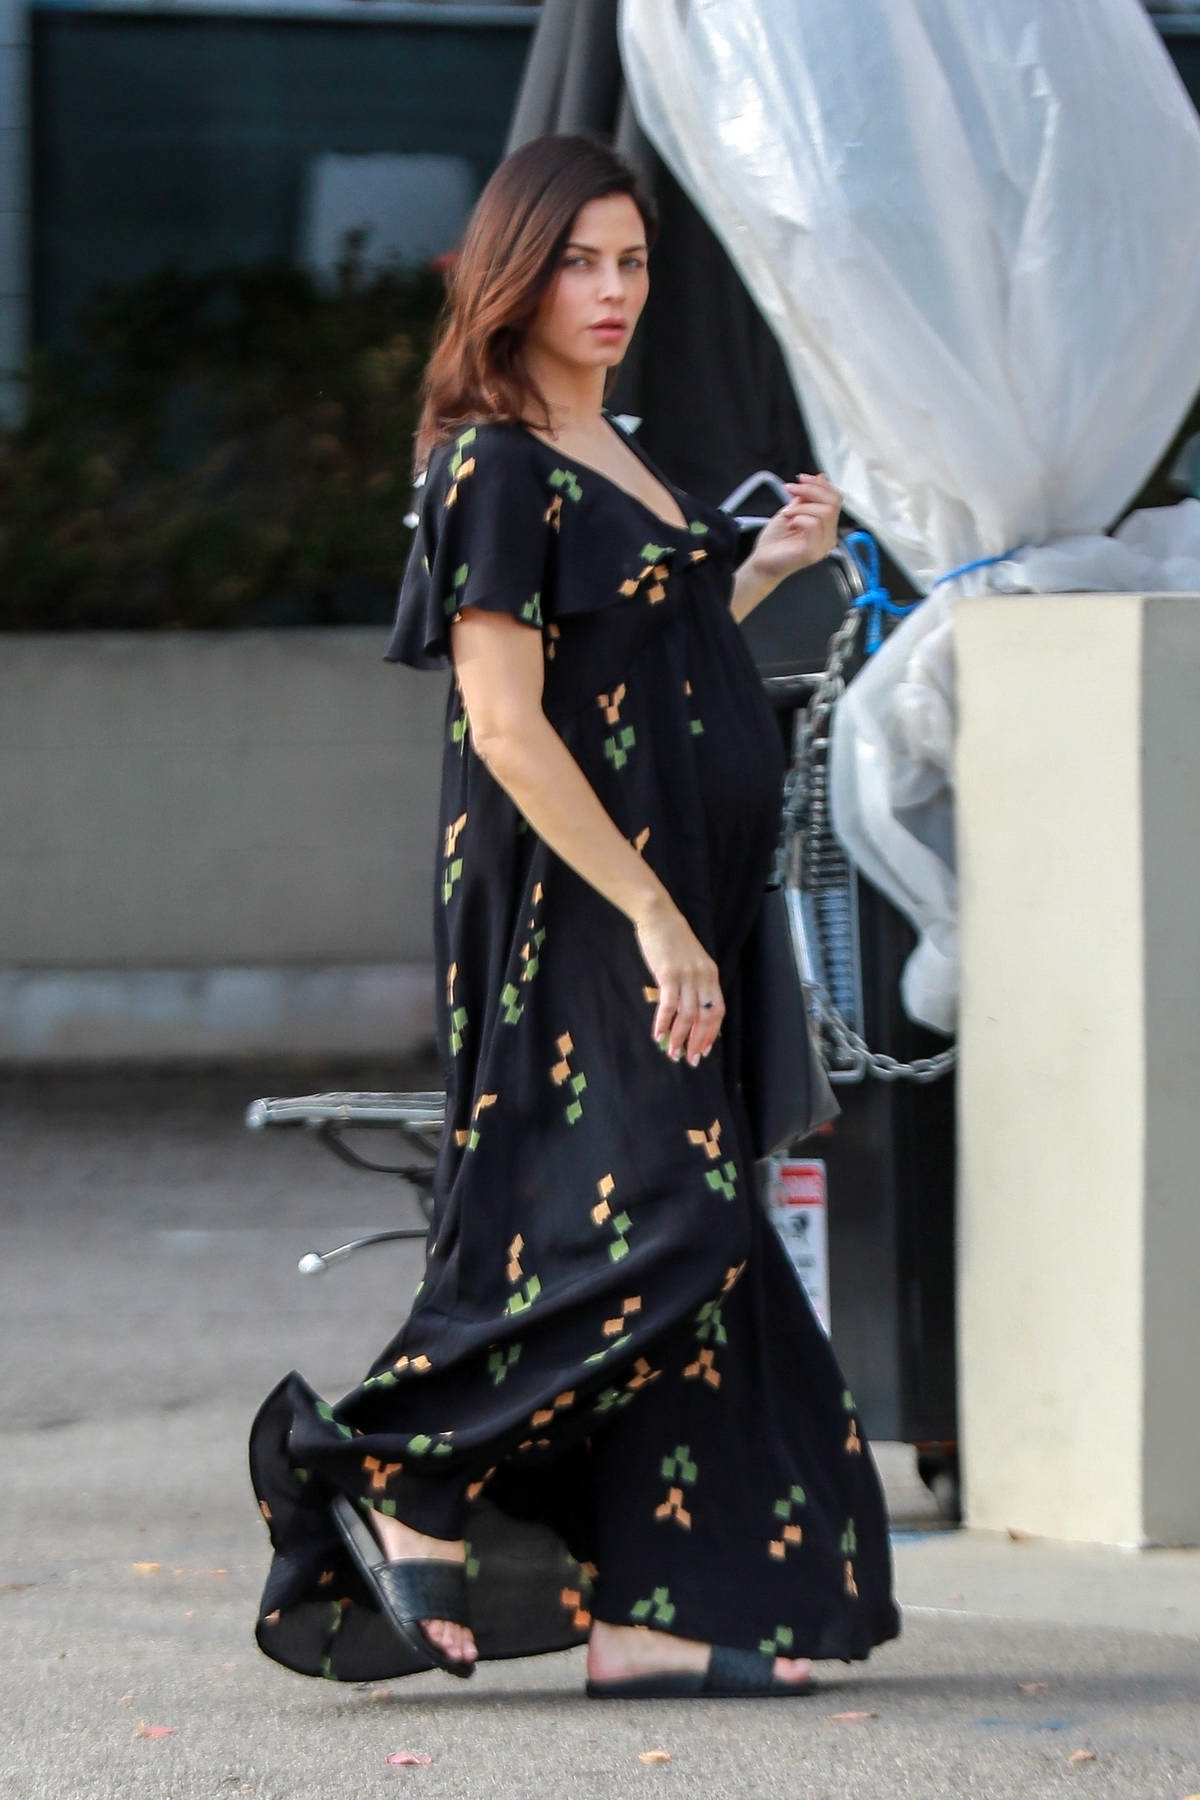 Sofia Vergara looks lovely in a floral print dress as she arrives at a  taping for